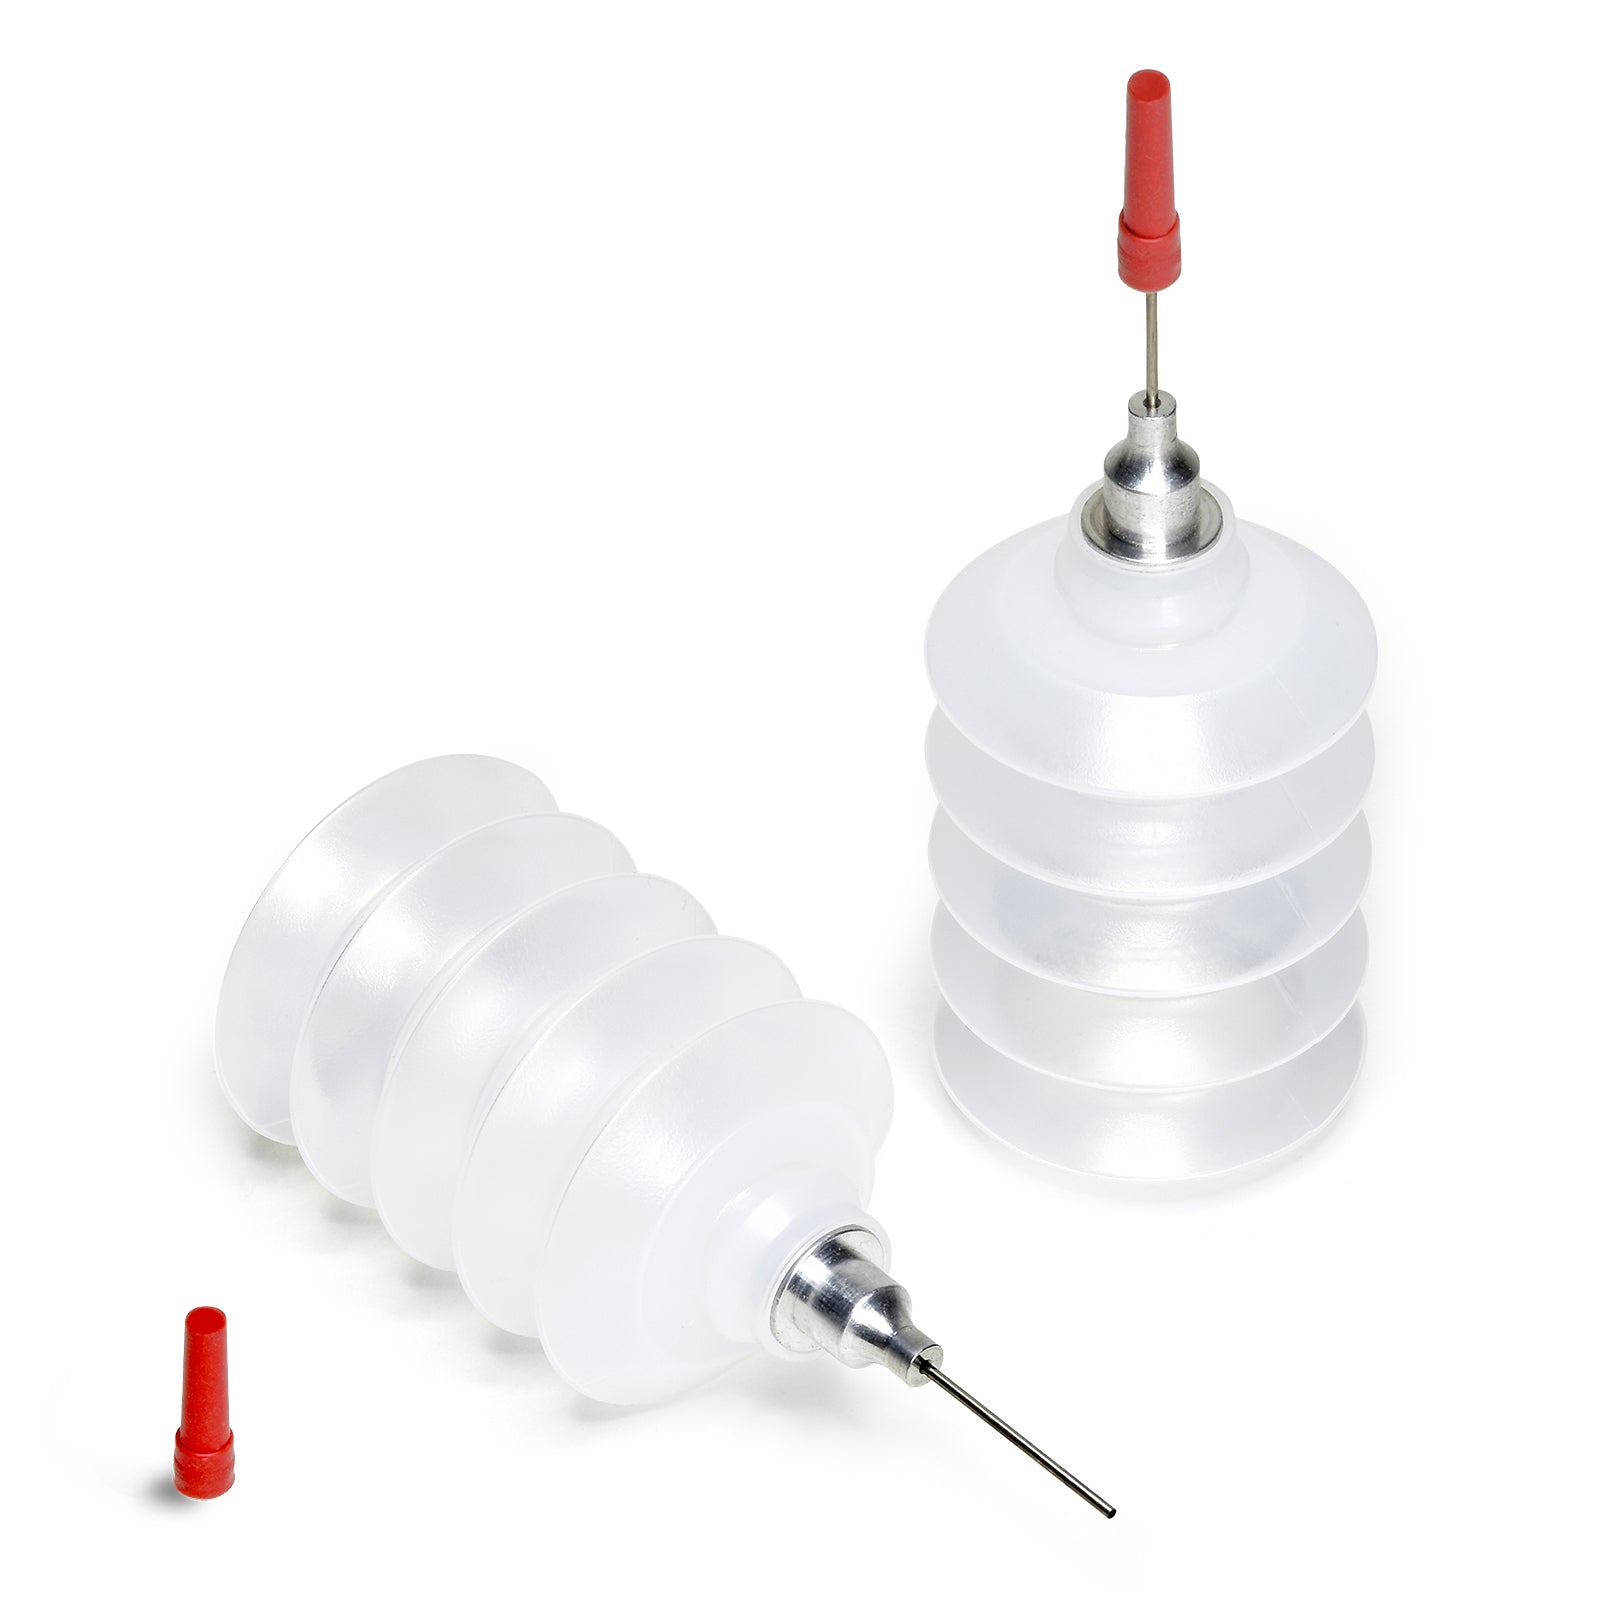 1 oz. Chemical-Resistant Bellows-Type Applicator (Set of 2)